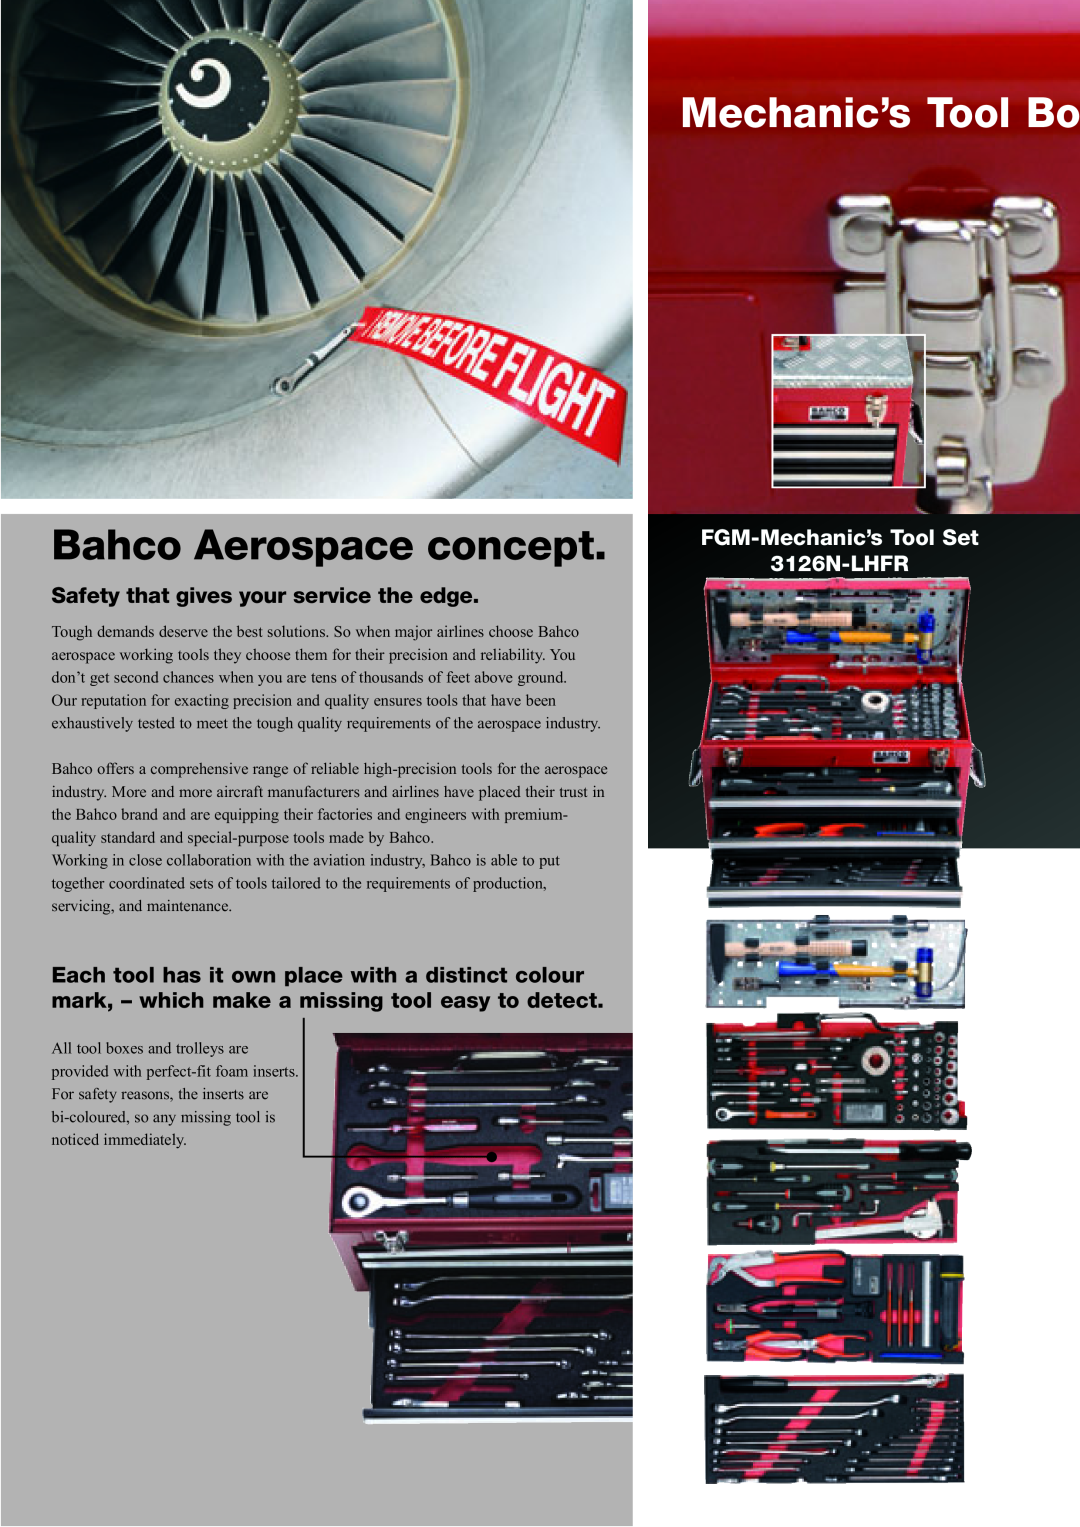 Bahco 3126N-LHFR manual Bahco Aerospace concept, Mechanic’s Tool Bo, Safety that gives your service the edge 